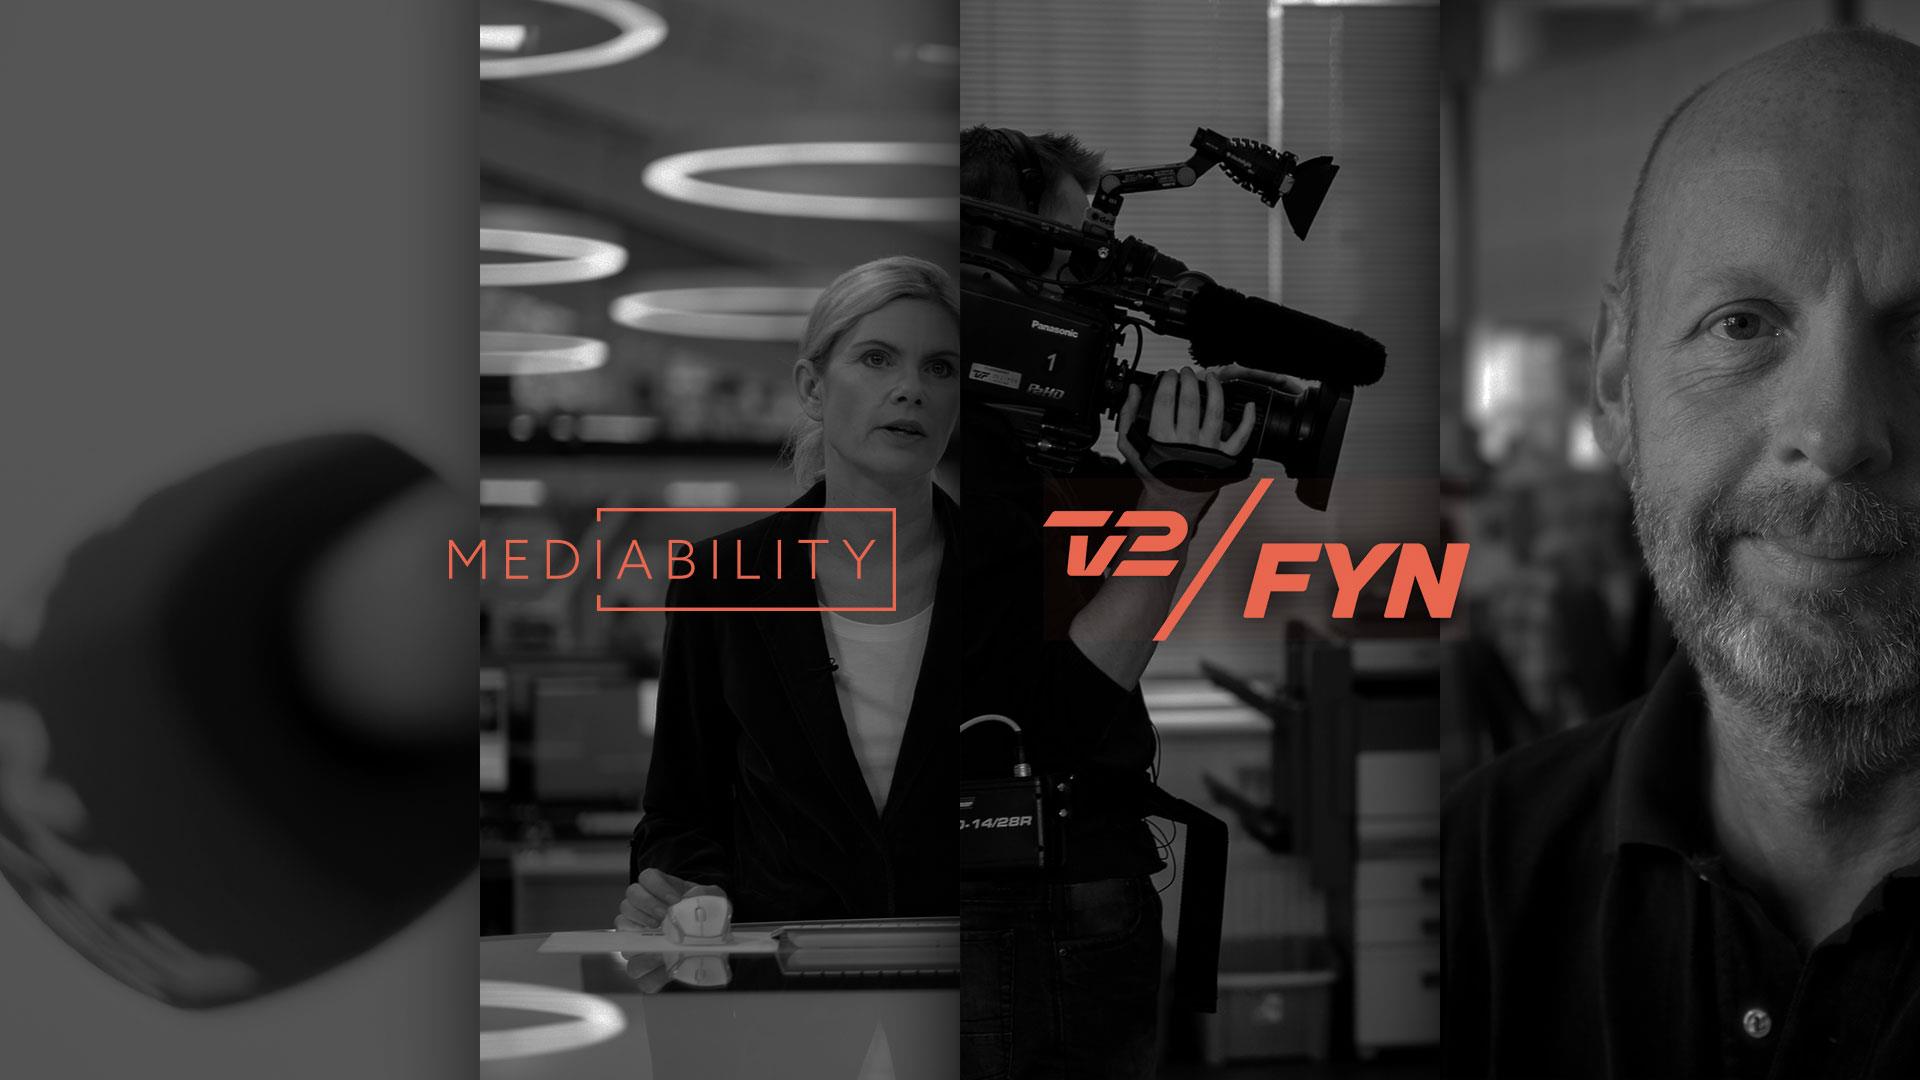 Mediability to build story-centric, cloud-based newsroom of the future for Denmark’s TV 2/FYN